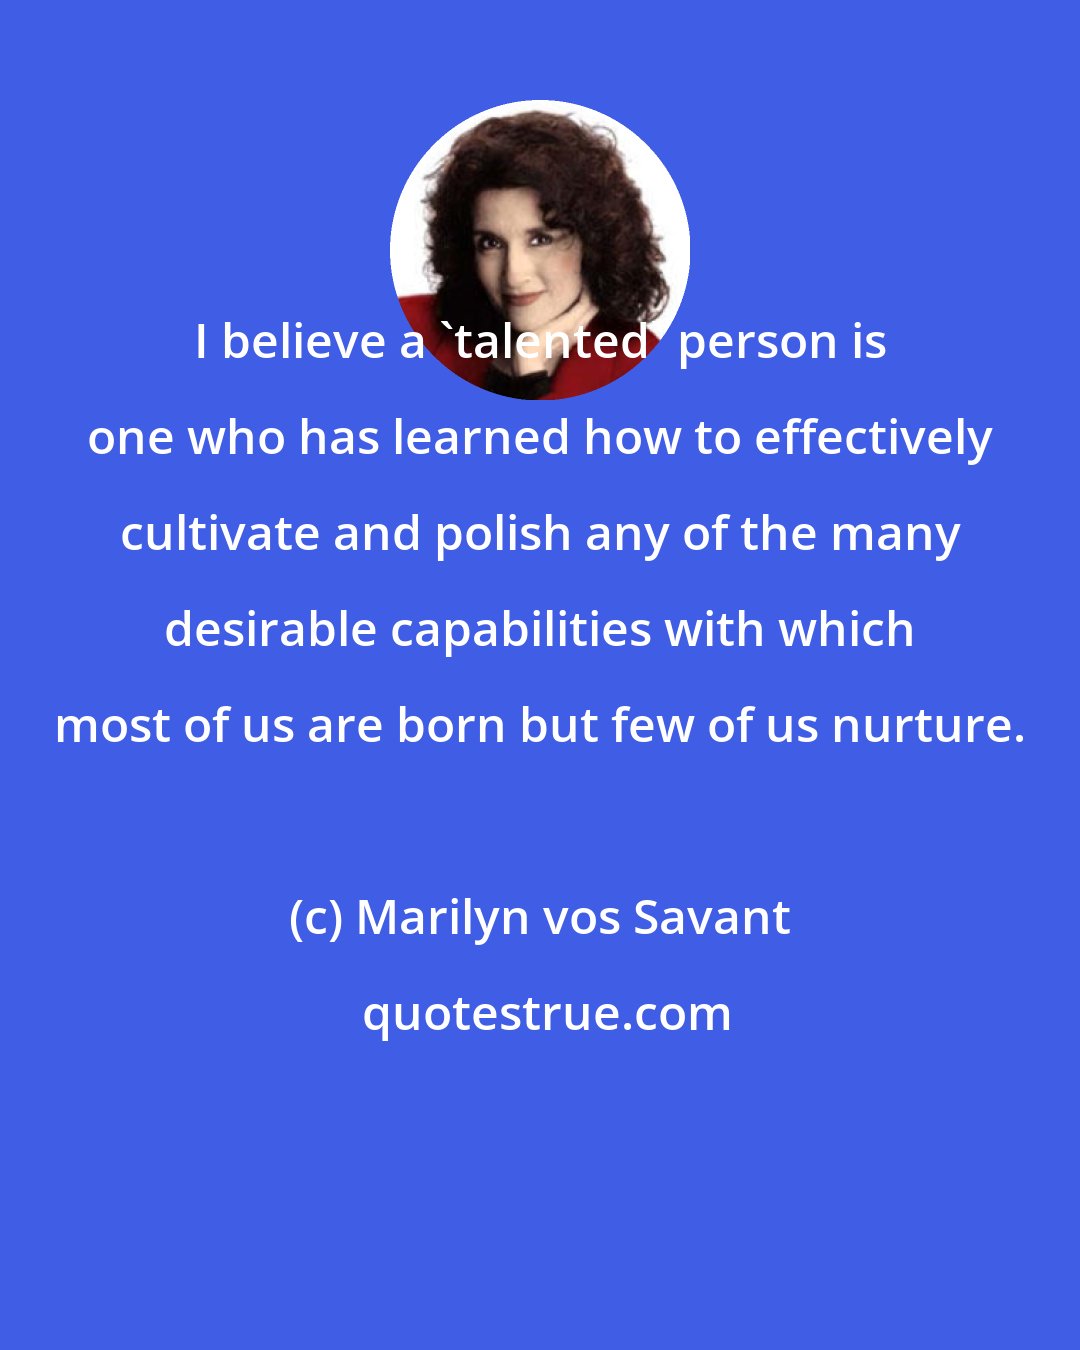 Marilyn vos Savant: I believe a 'talented' person is one who has learned how to effectively cultivate and polish any of the many desirable capabilities with which most of us are born but few of us nurture.